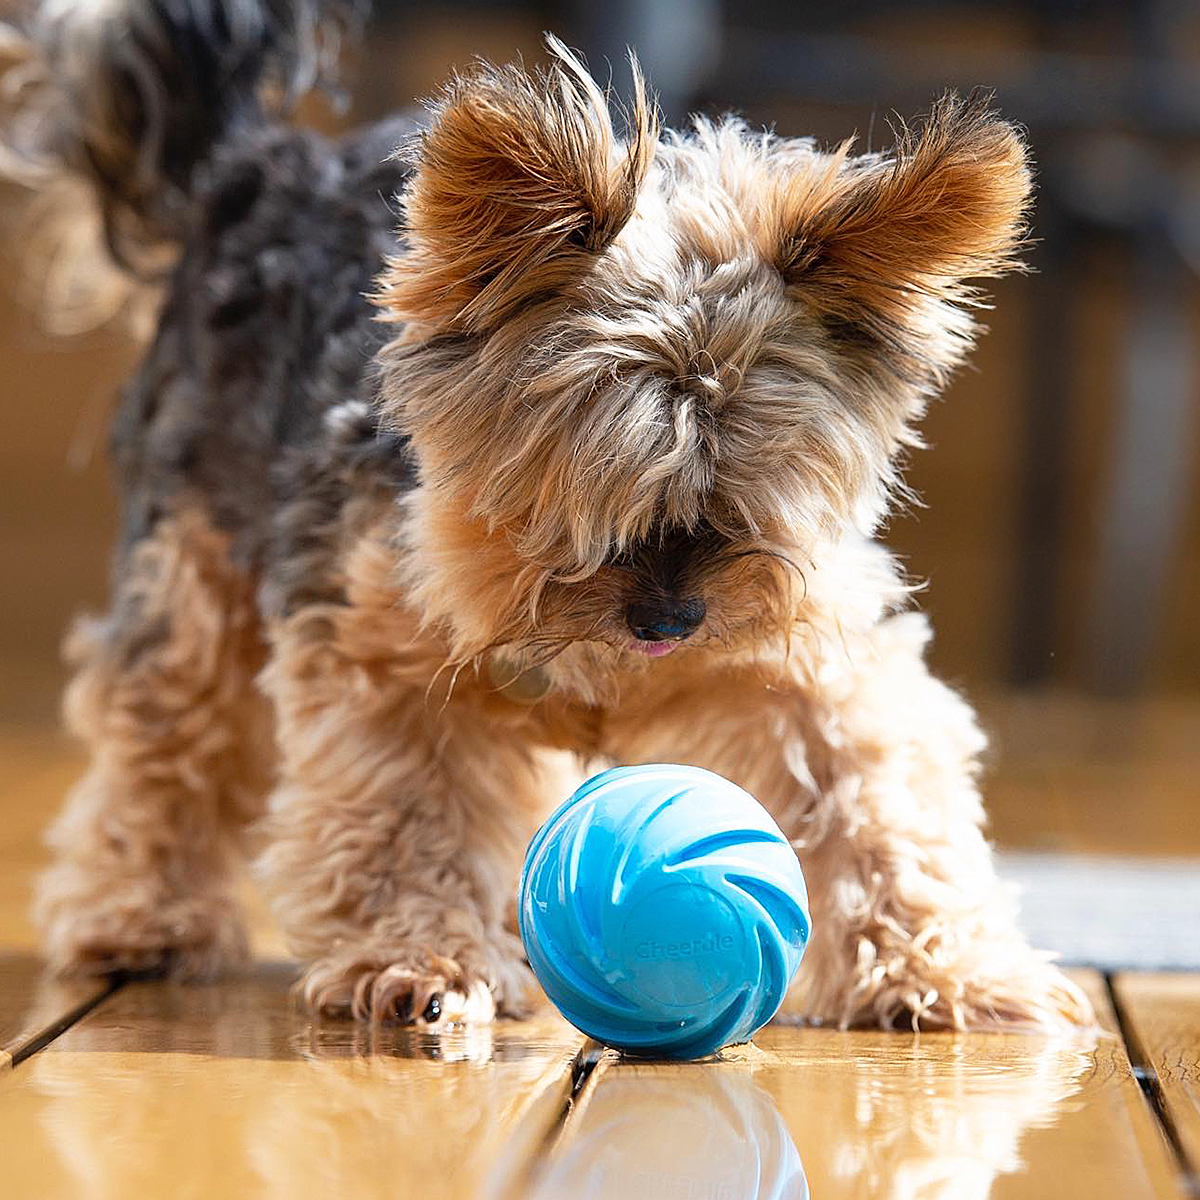 Cheerble Interactive Automatic Ball Smart Robotic Indoor Pet Toy Ball -  DVPets